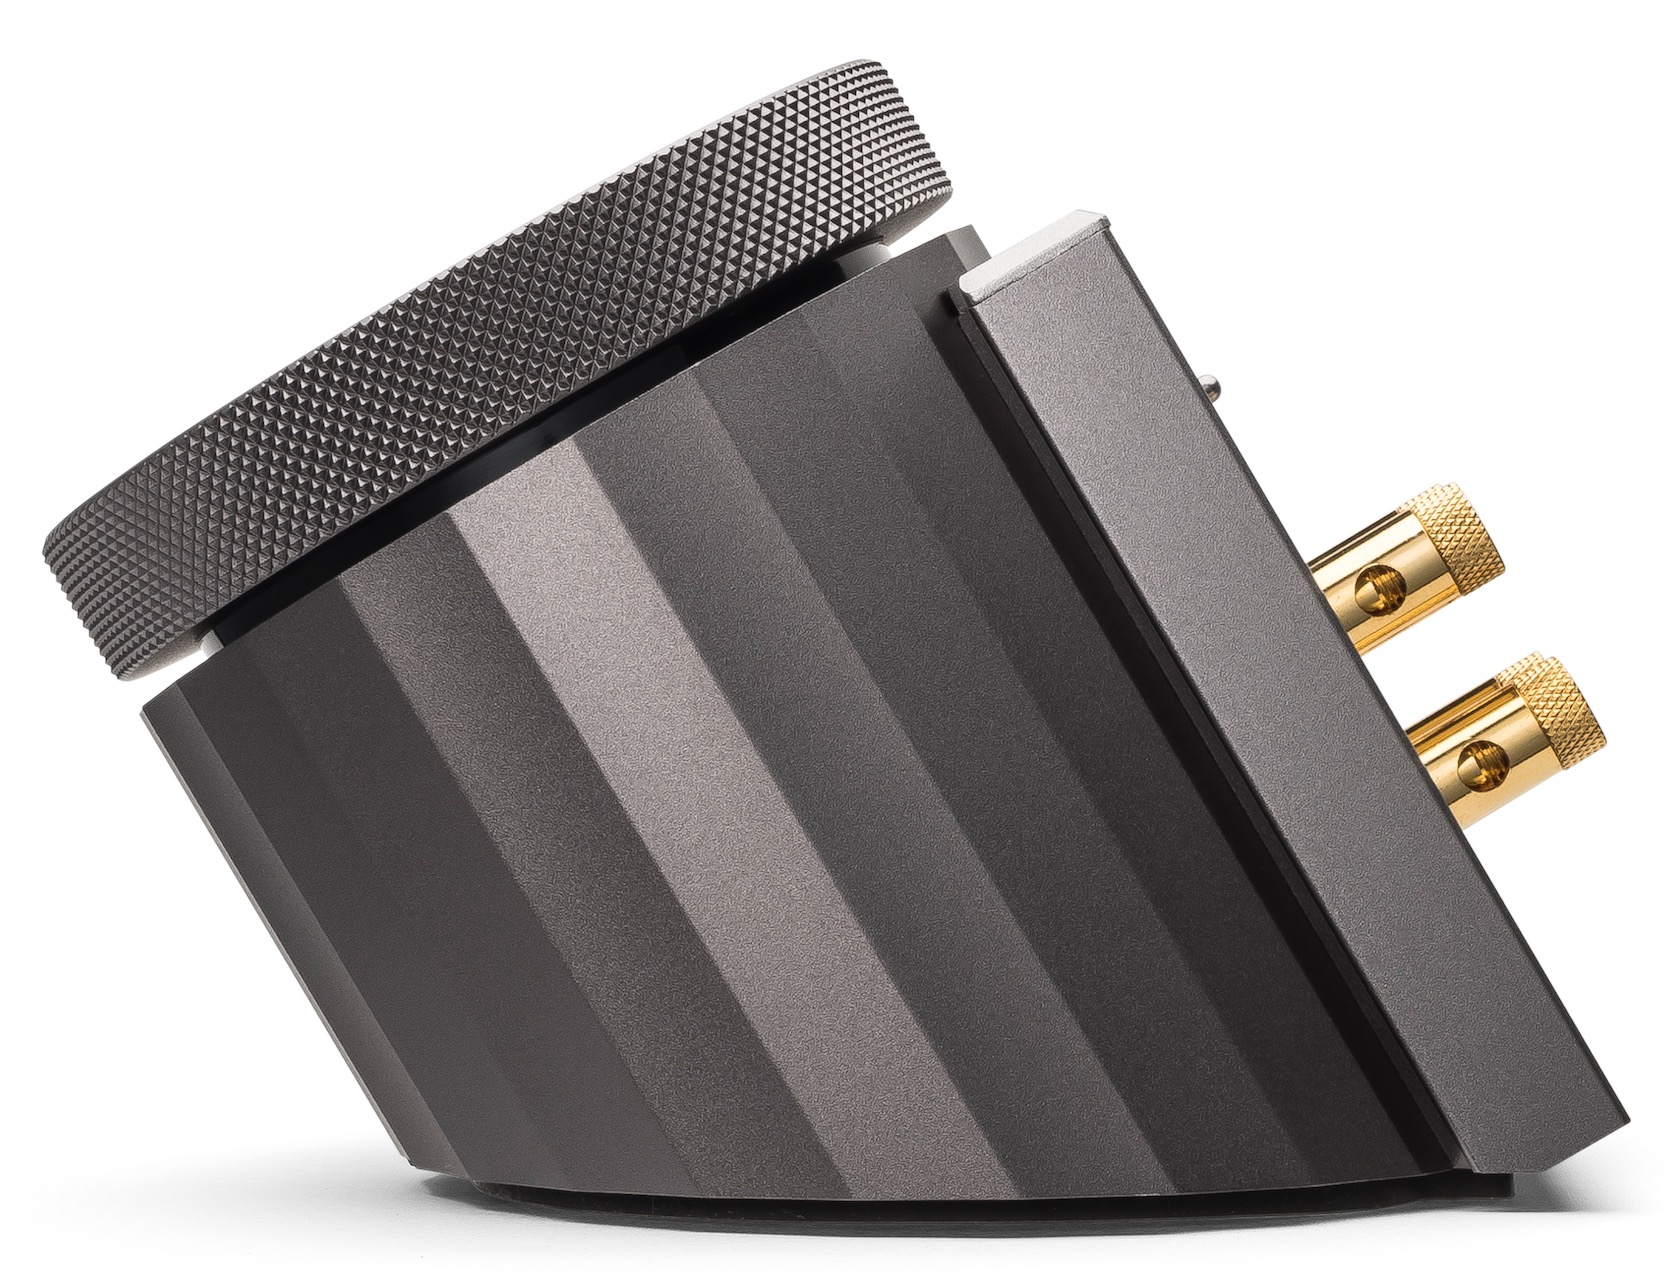 ACRO L1000 from Astell&Kern: head amp/DAC - The Audiophile Man